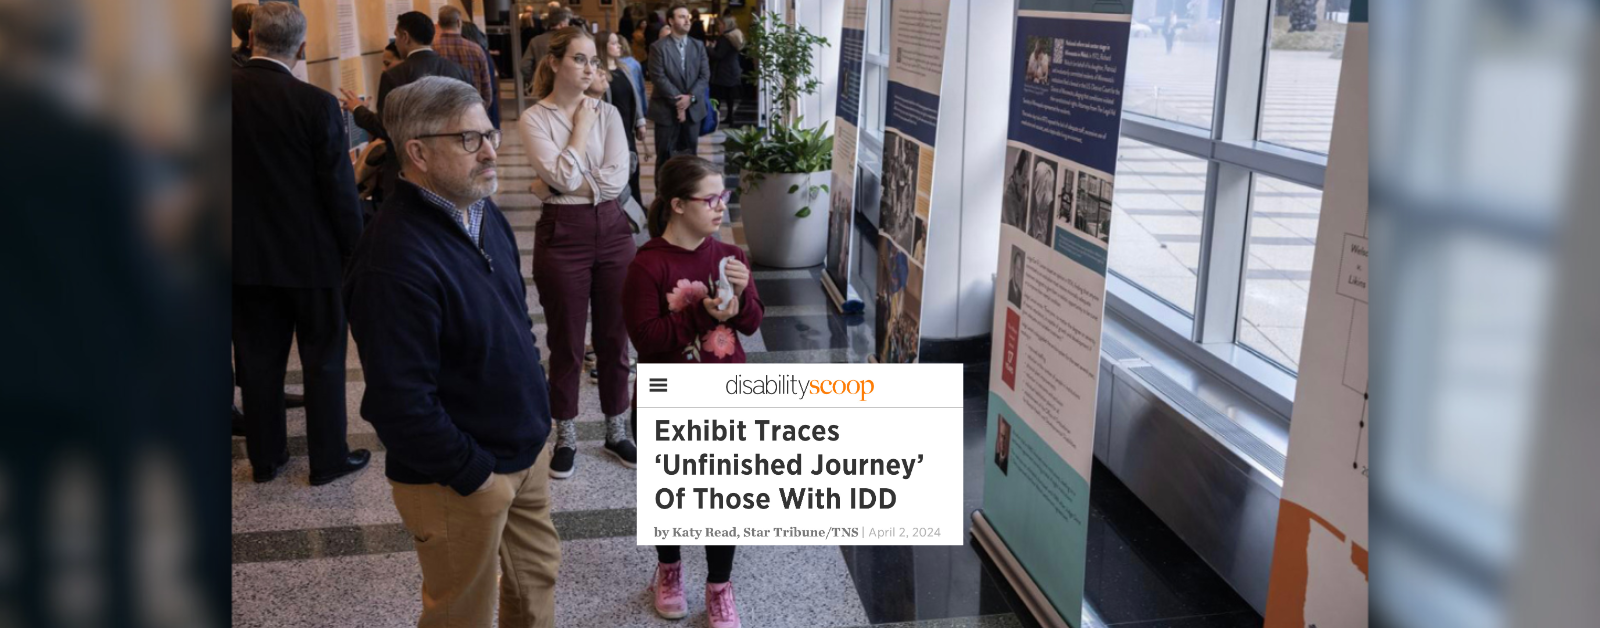 Screenshot of the cover of the article “Exhibit Traces ‘Unfinished Journey’ Of Those With IDD “. Lee Shervheim, left and his daughter Emie Shervheim 20, look over the exhibit "An Unfinished Journey" in the Federal Courts lobby of the U.S. Courthouse in Minneapolis. (Jerry Holt/Star Tribune/TNS)